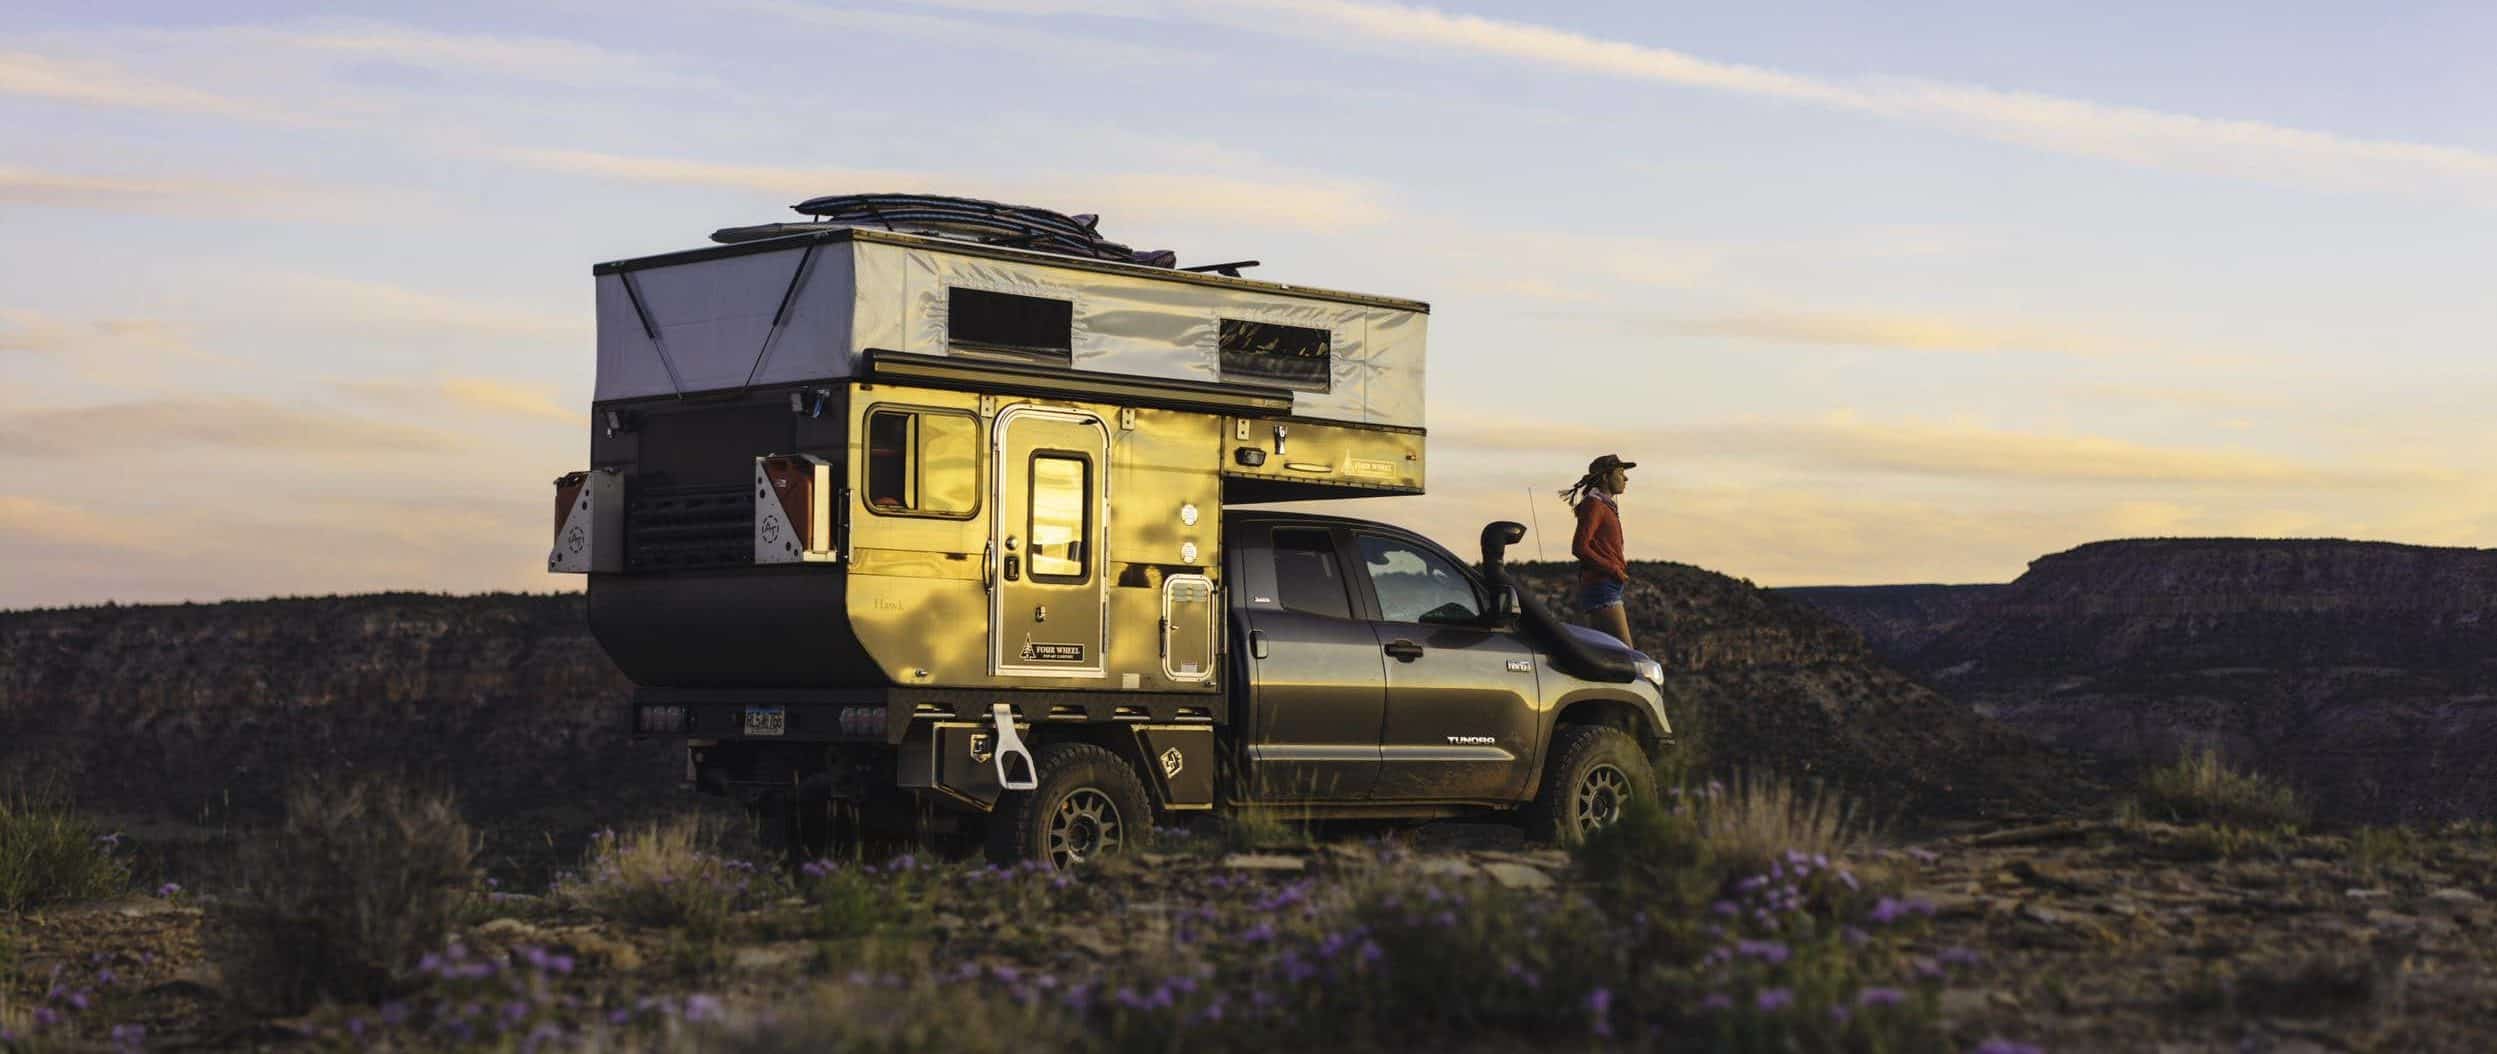 Bound for nowhere overland truck camper popup